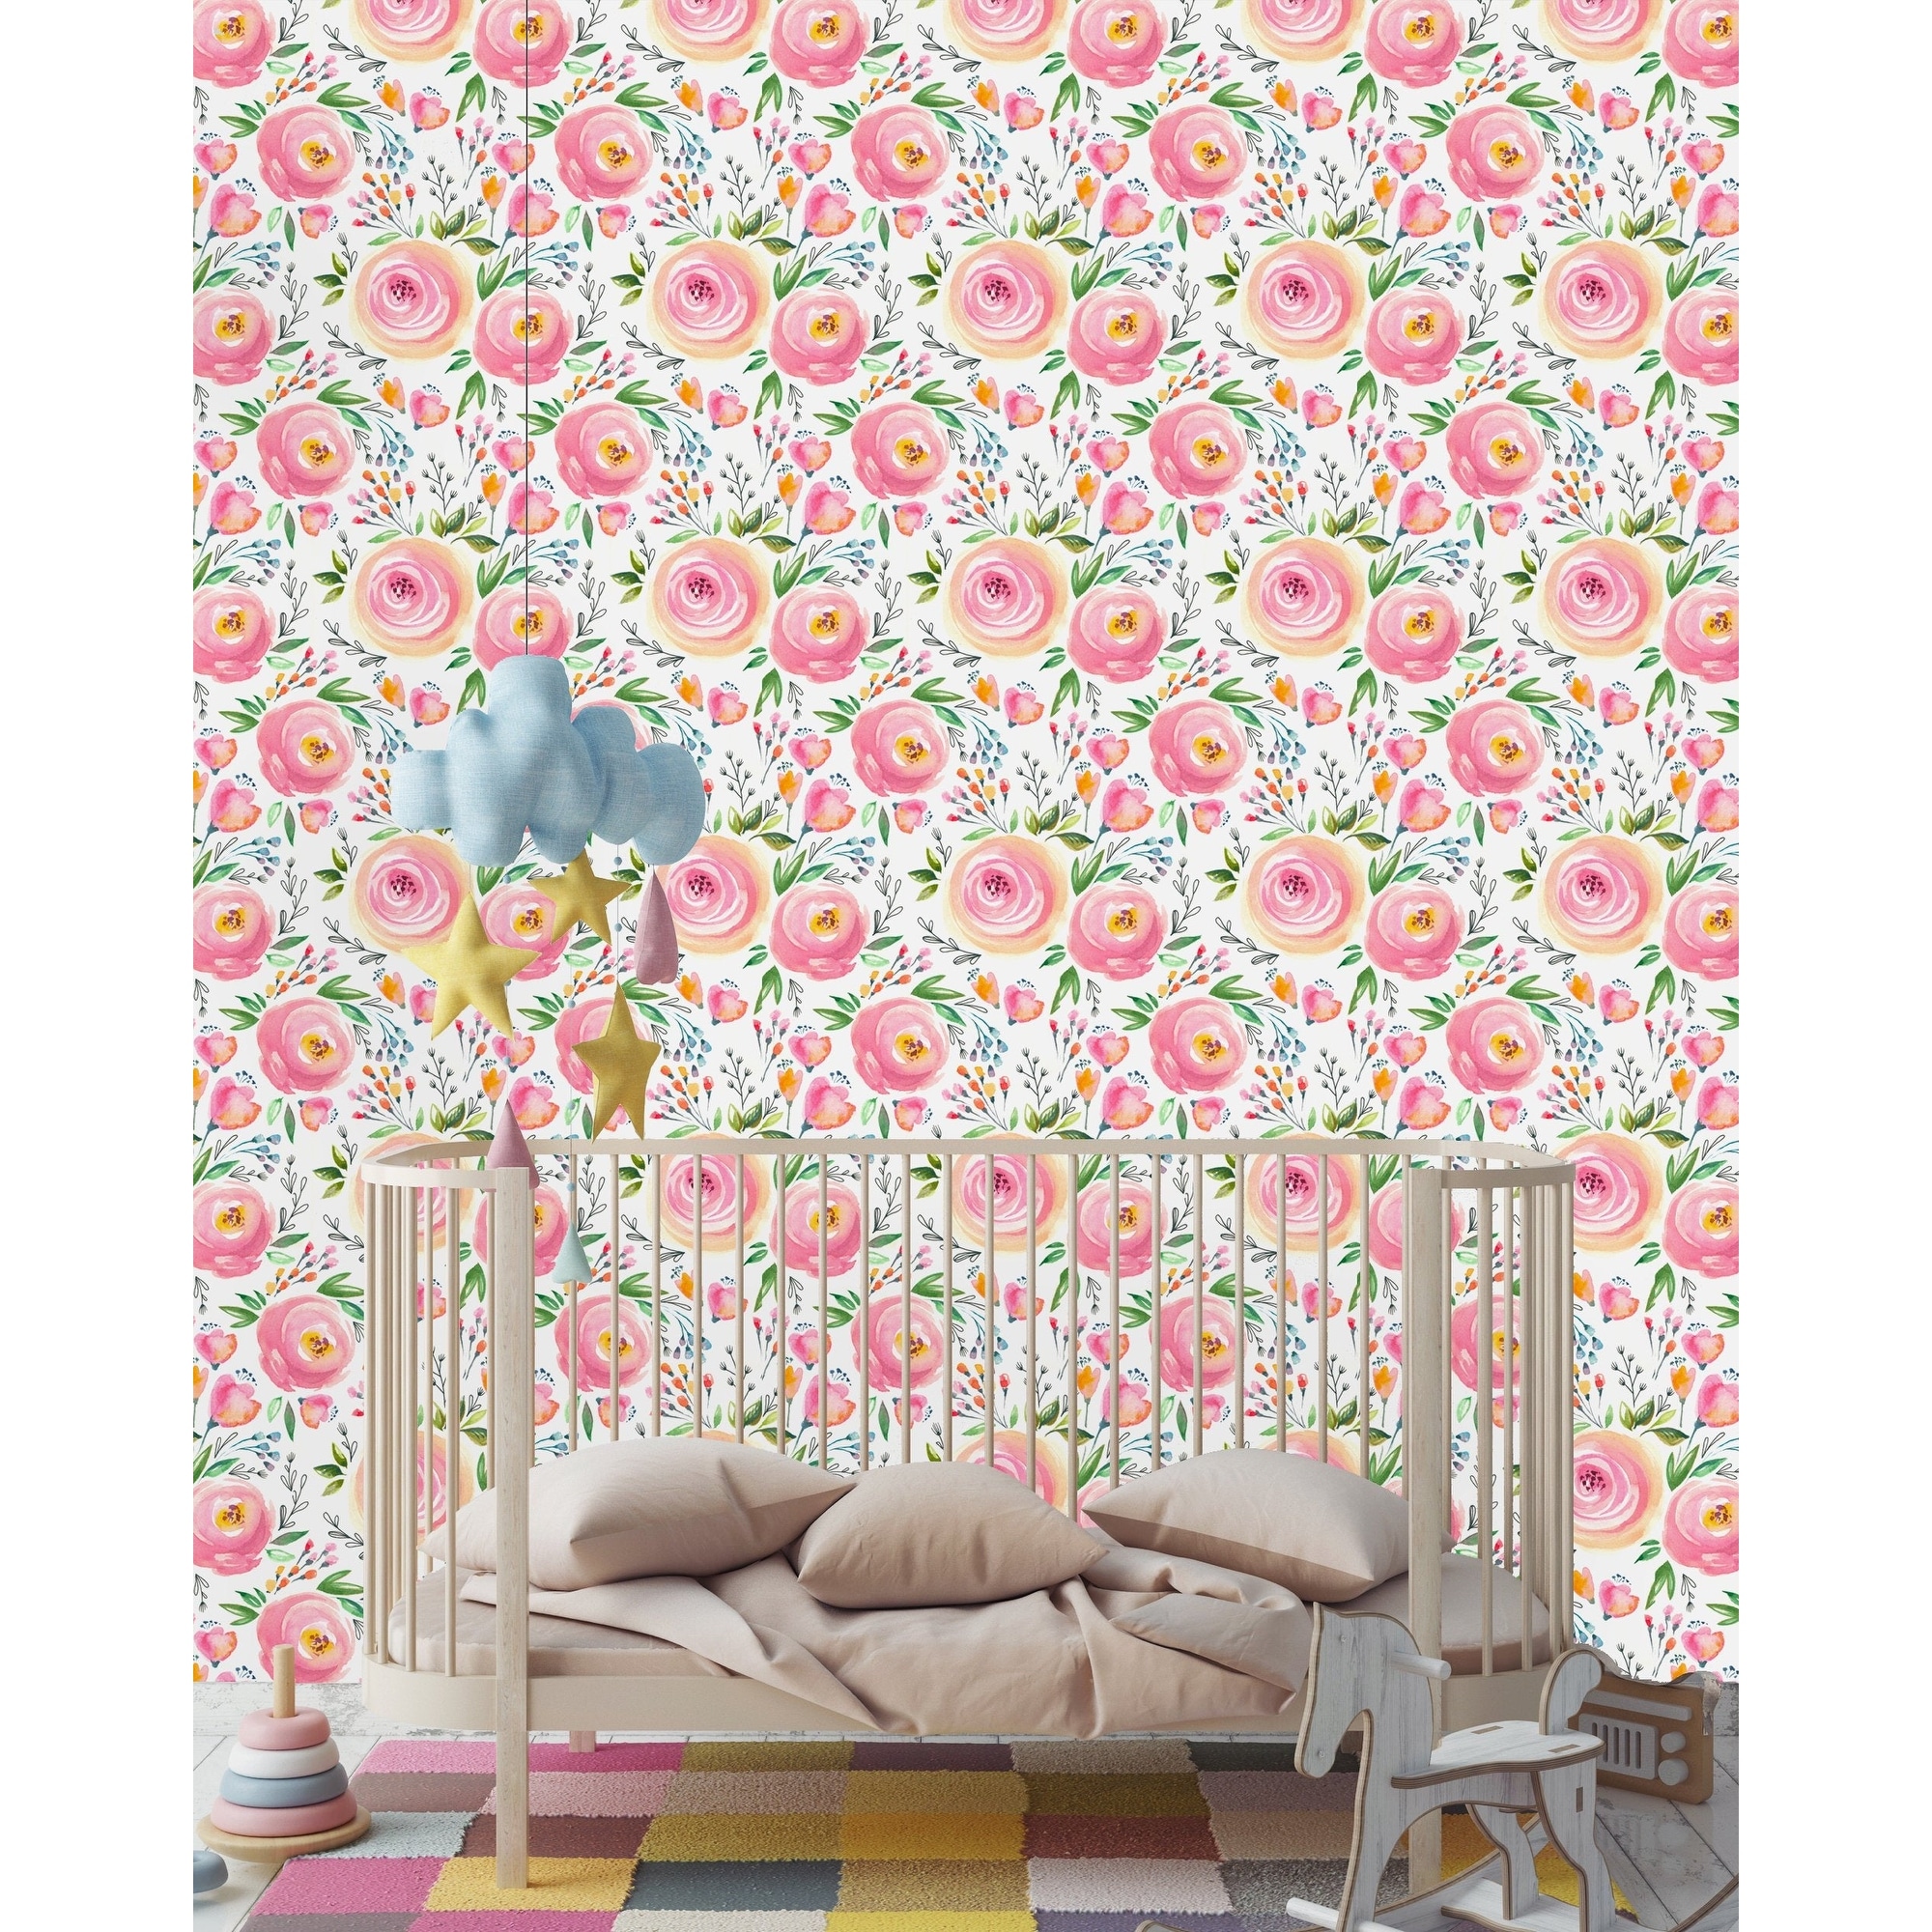 COCODECO Green Leaf Wallpaper Pink Daisies Prepasted Paper for Kids Room  Nursery PVCFree Removable 67 H x 102 W   Amazoncom